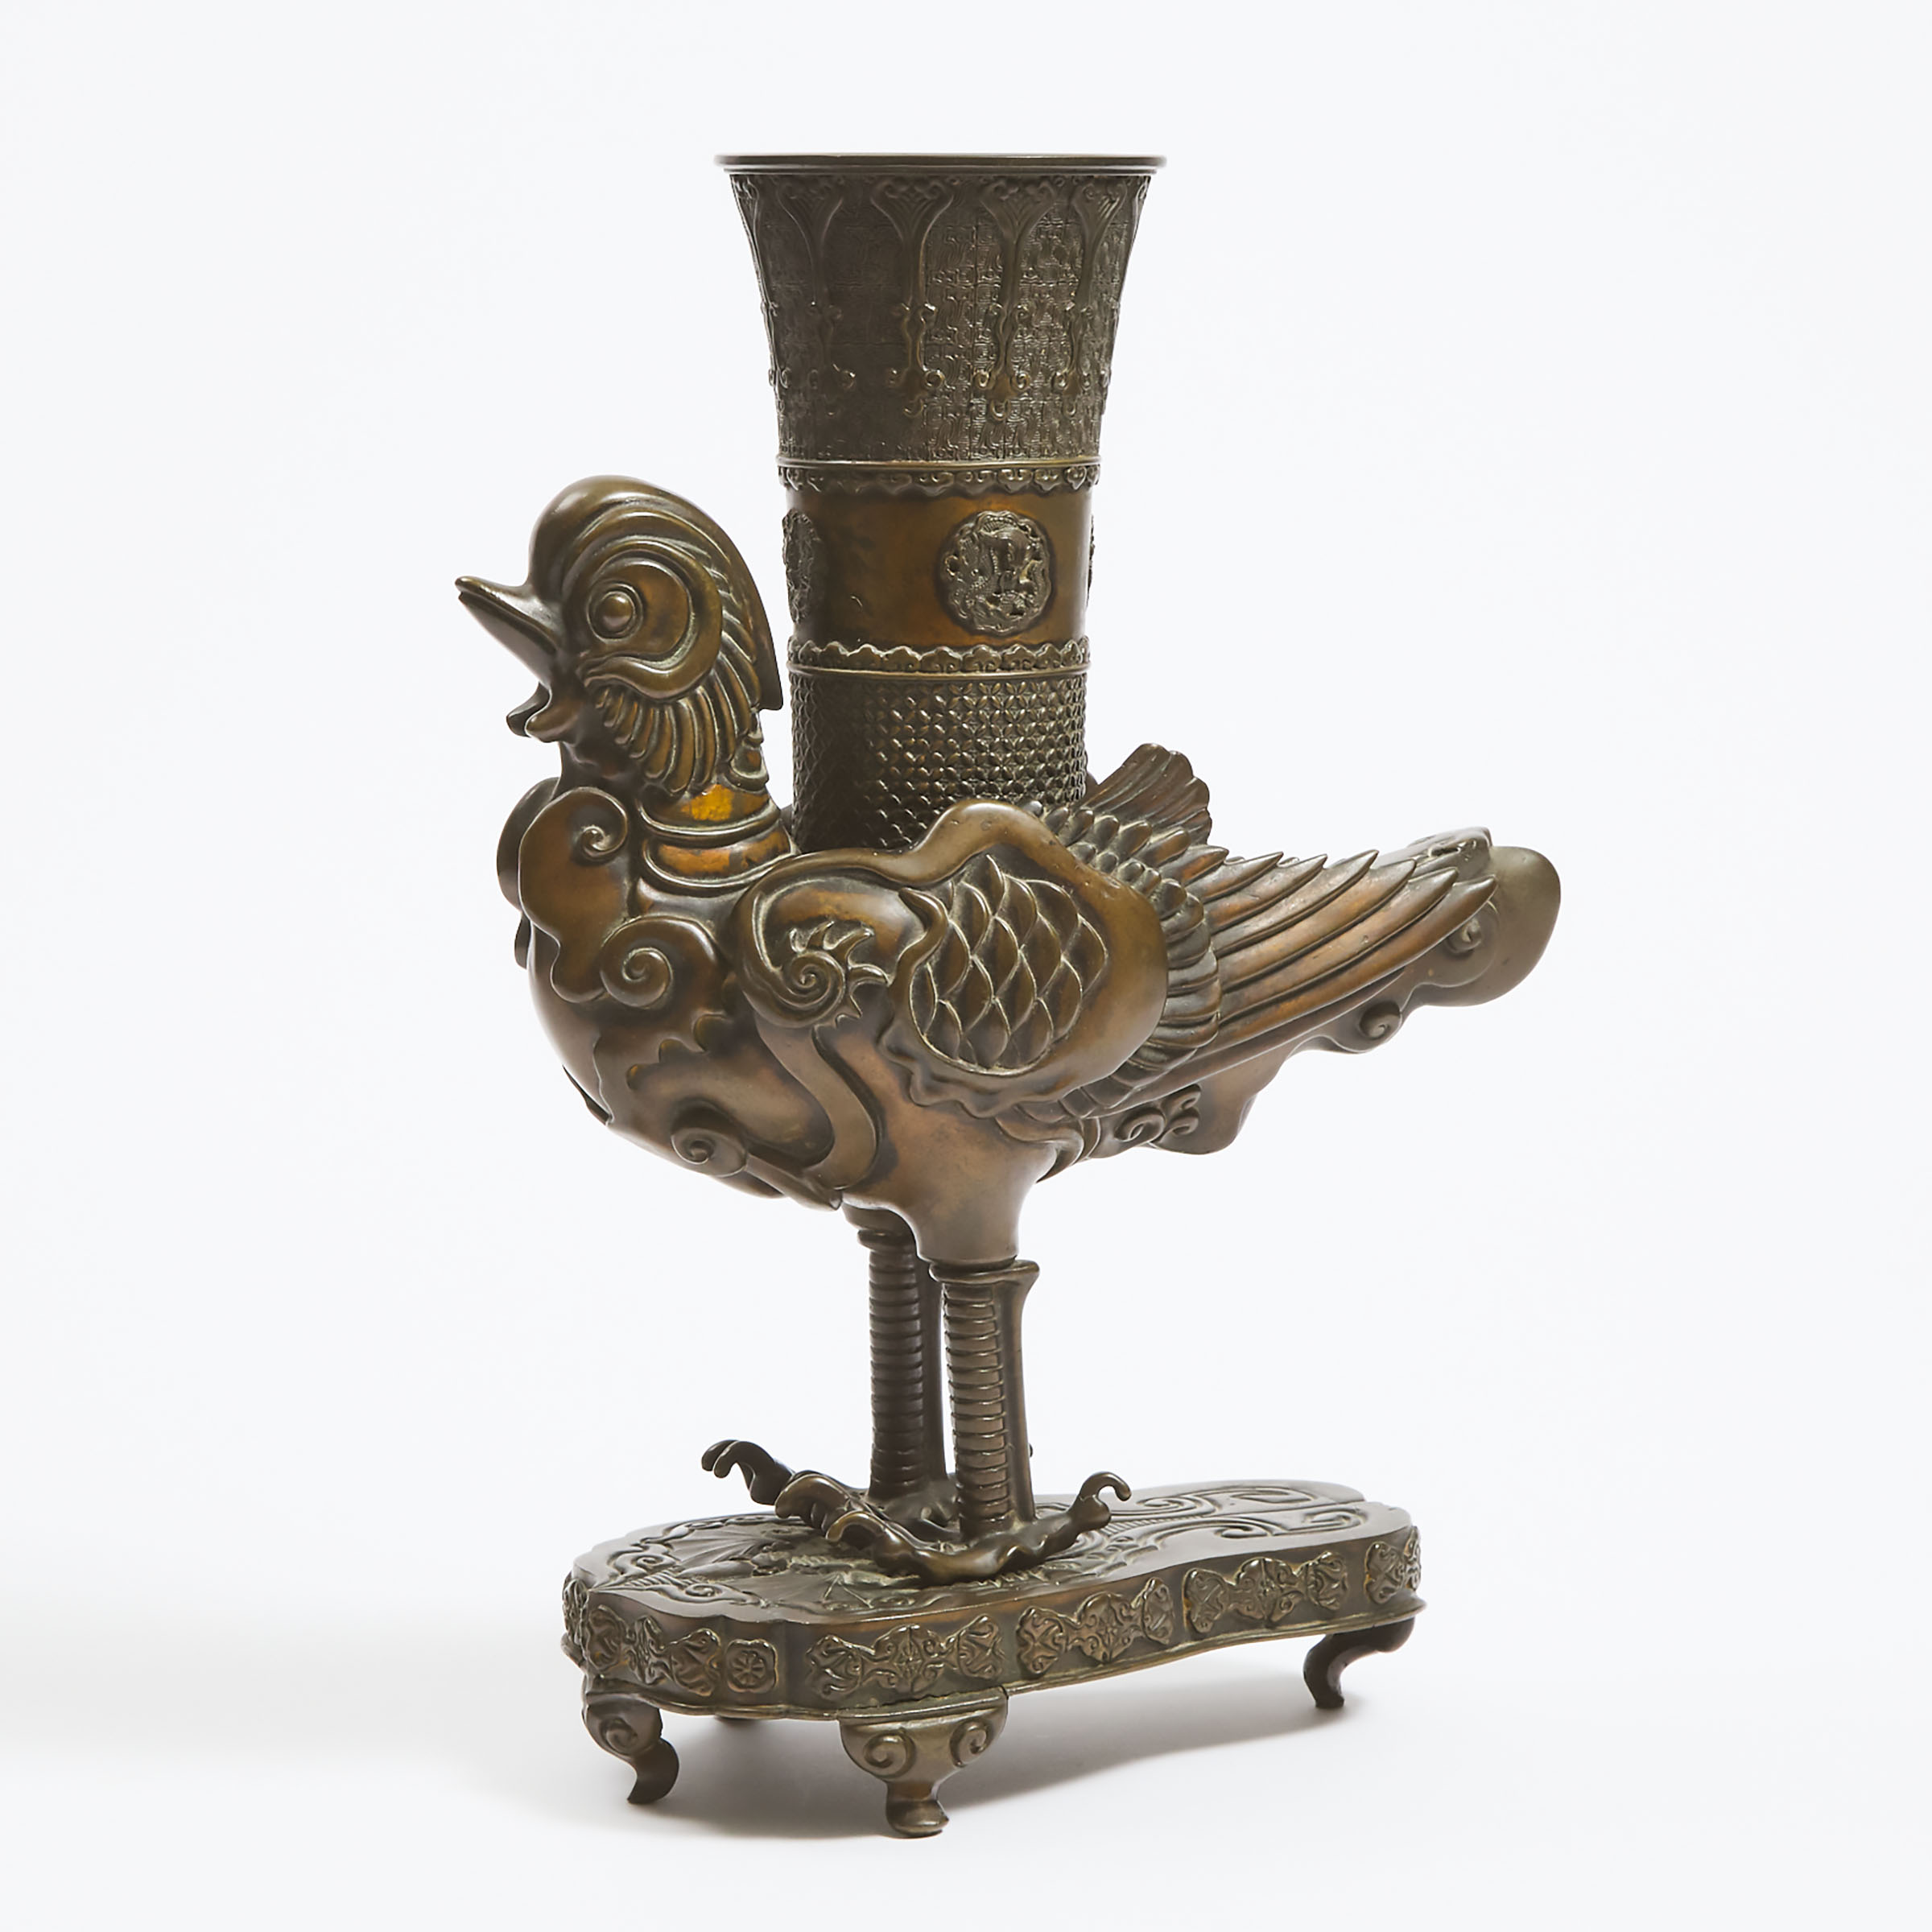 A Japanese Bronze Vase in the Form